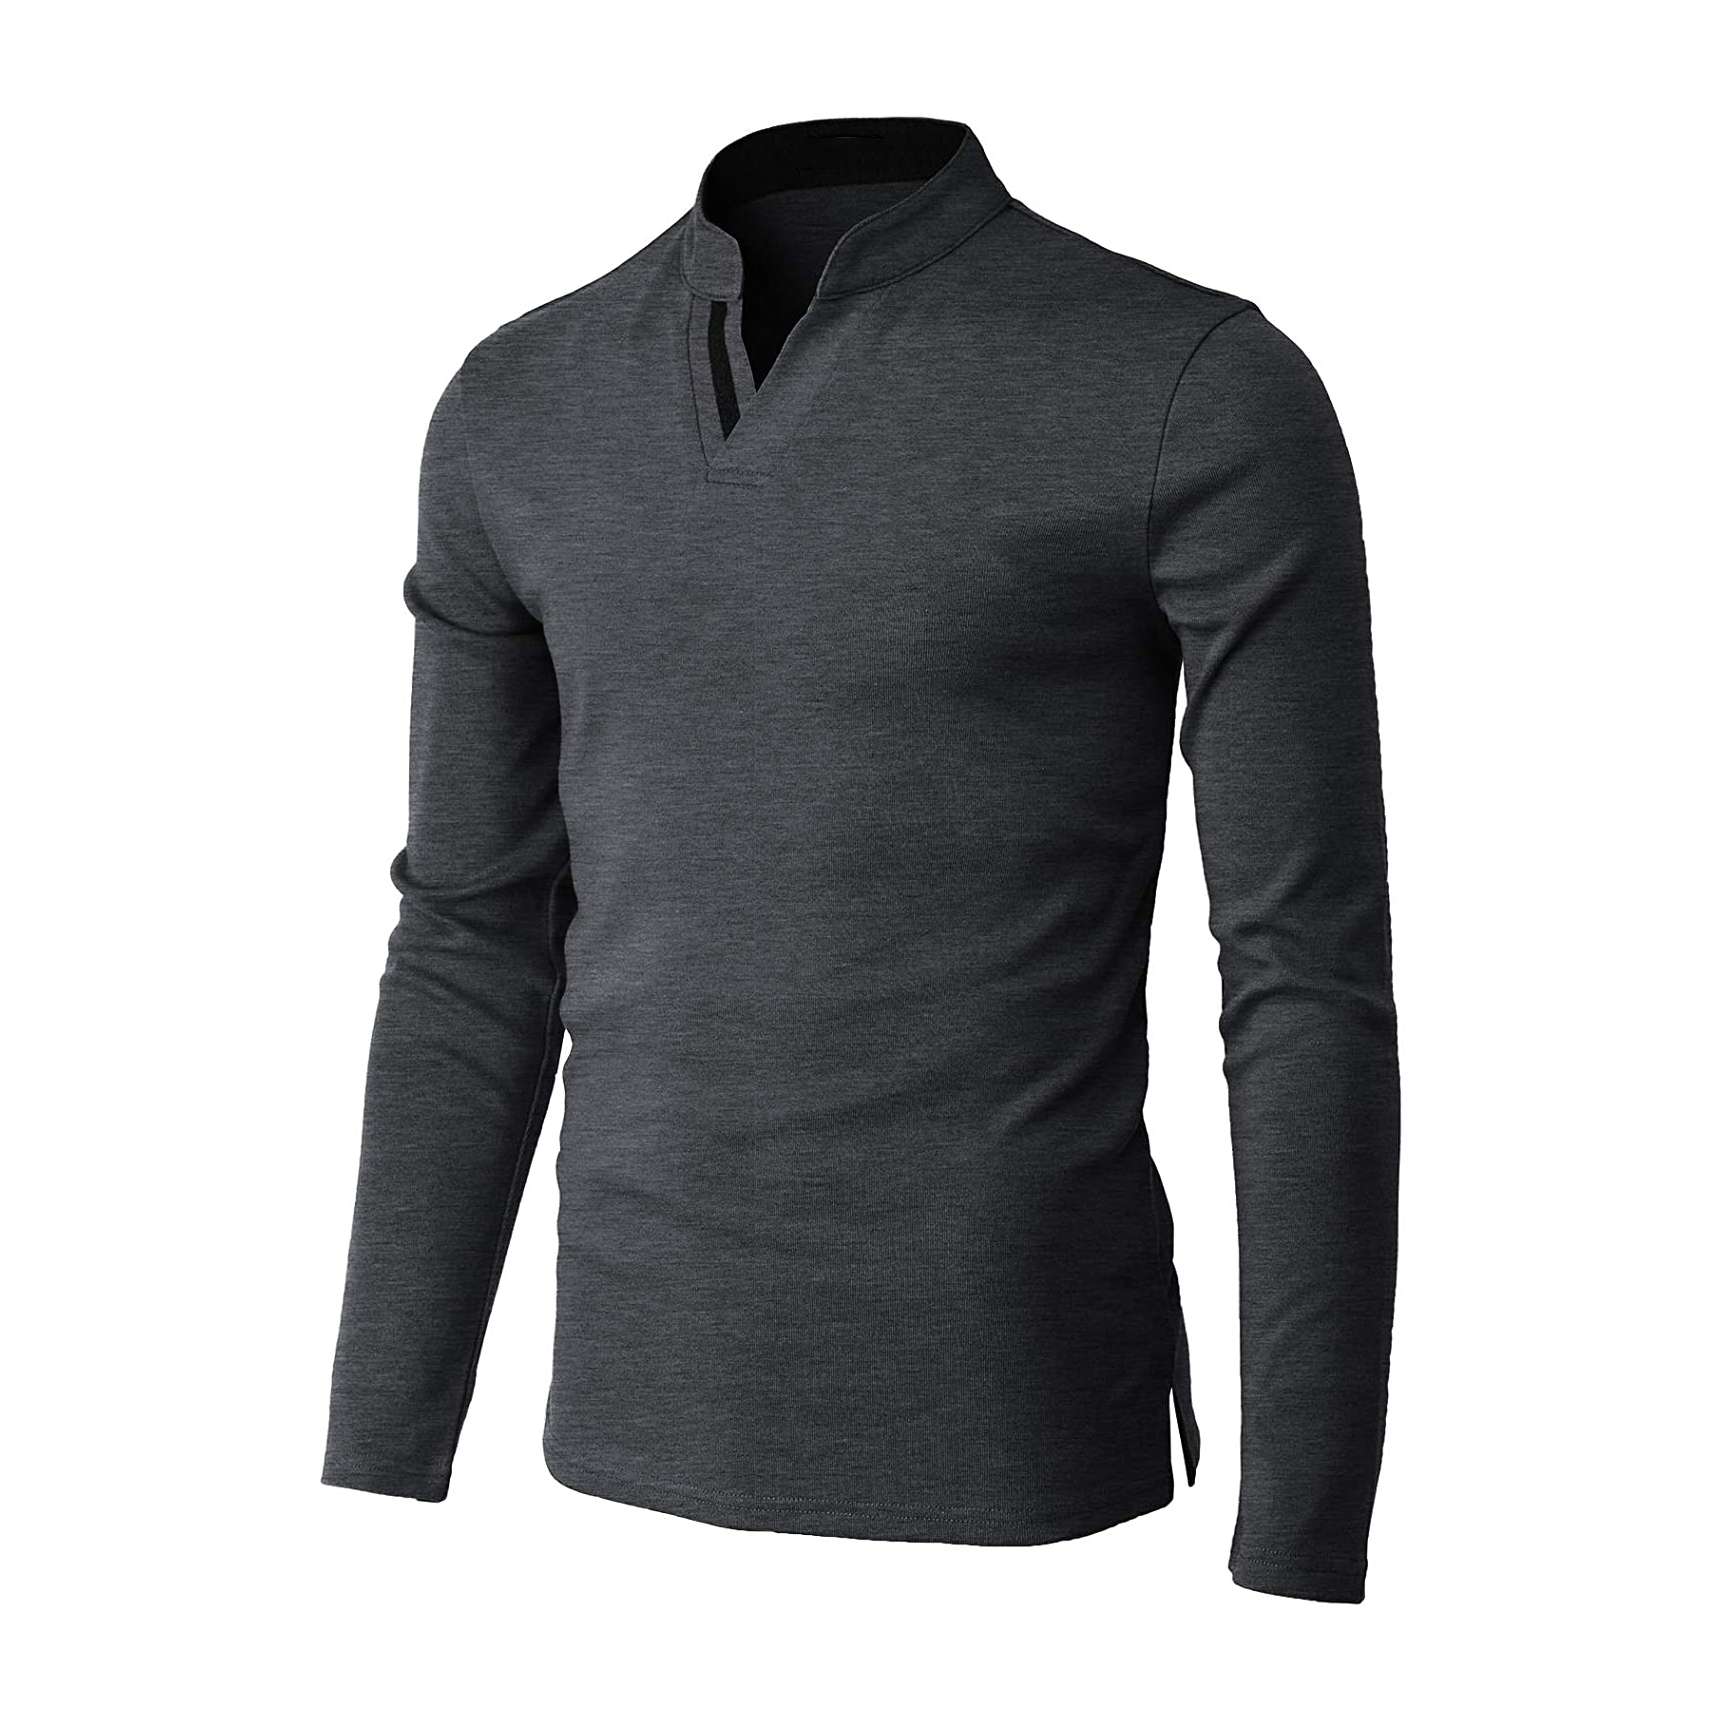 Mens Velcro Casual Outdoor Chic Tactical Long Sleeves Henley Shirts